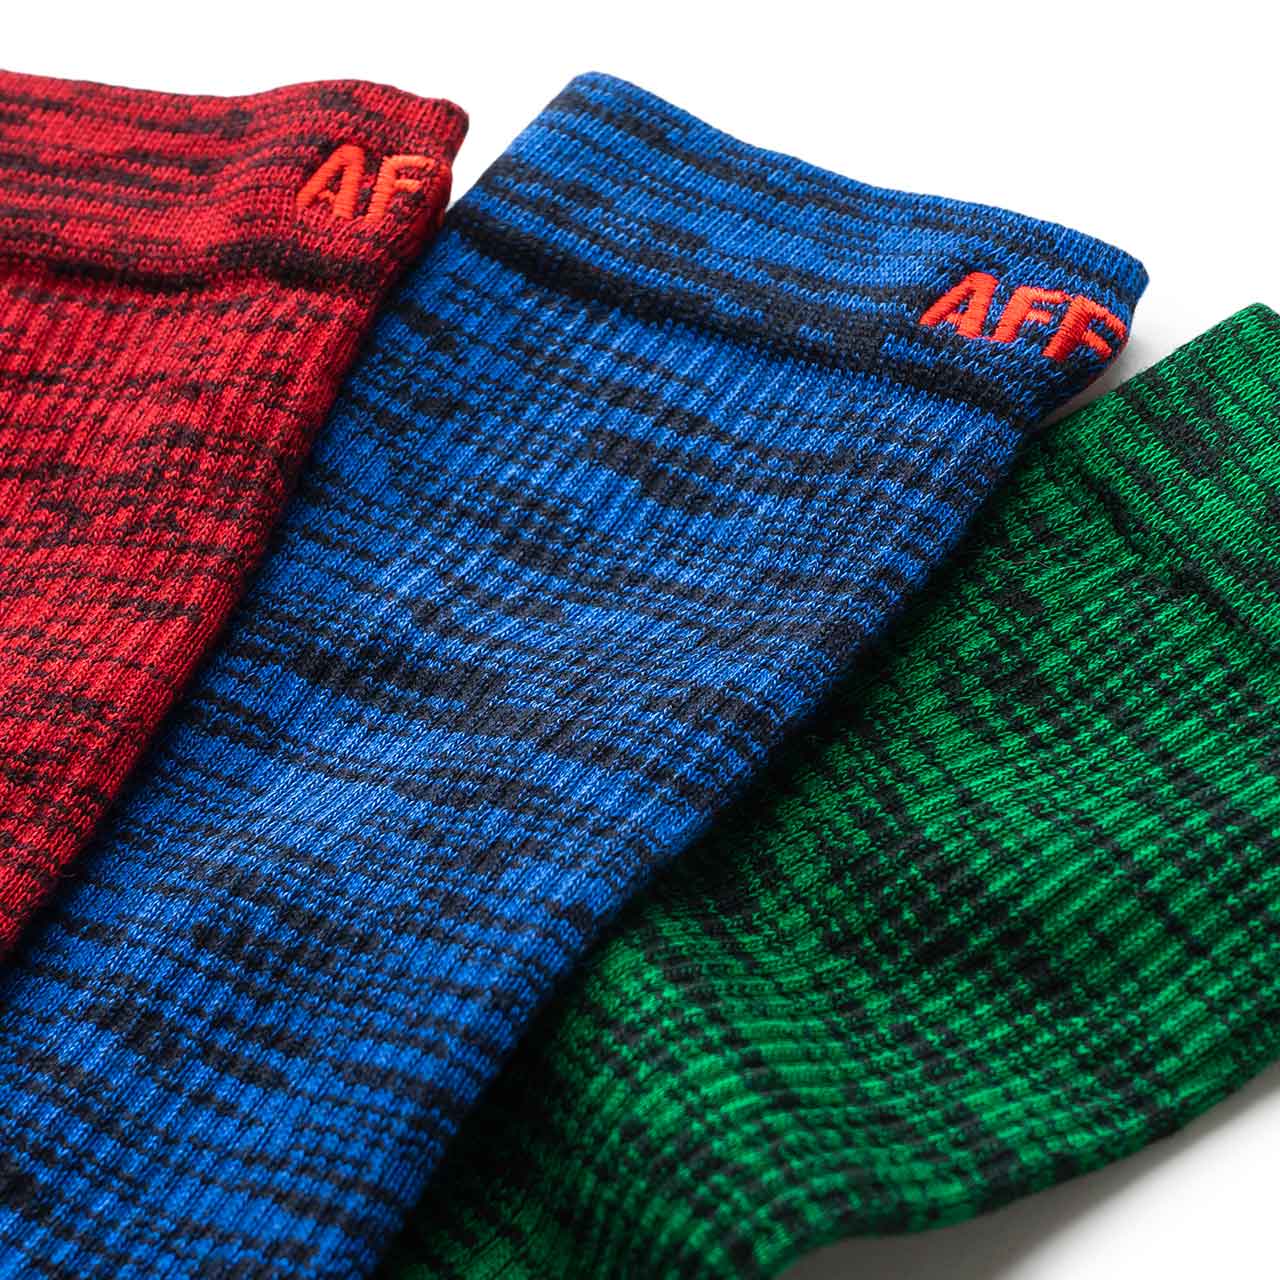 affix static sock 3 pack (red / green / blue) - aw20acc15 - a.plus - Image - 4